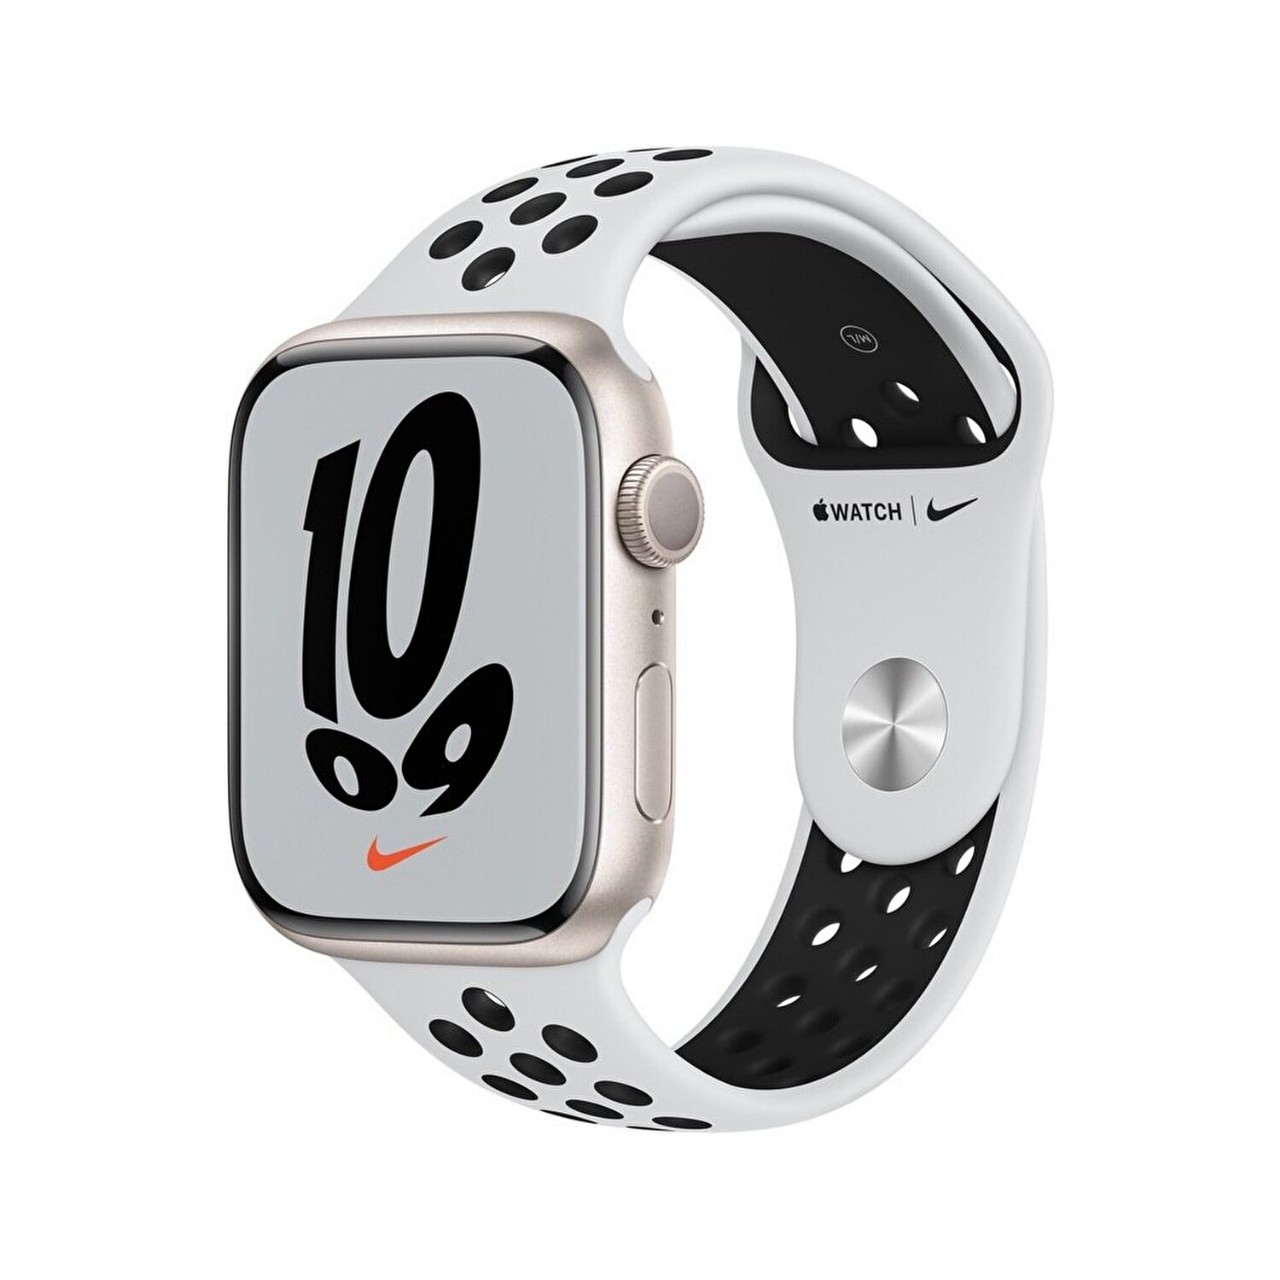 To change the time on your Apple Watch Nike+